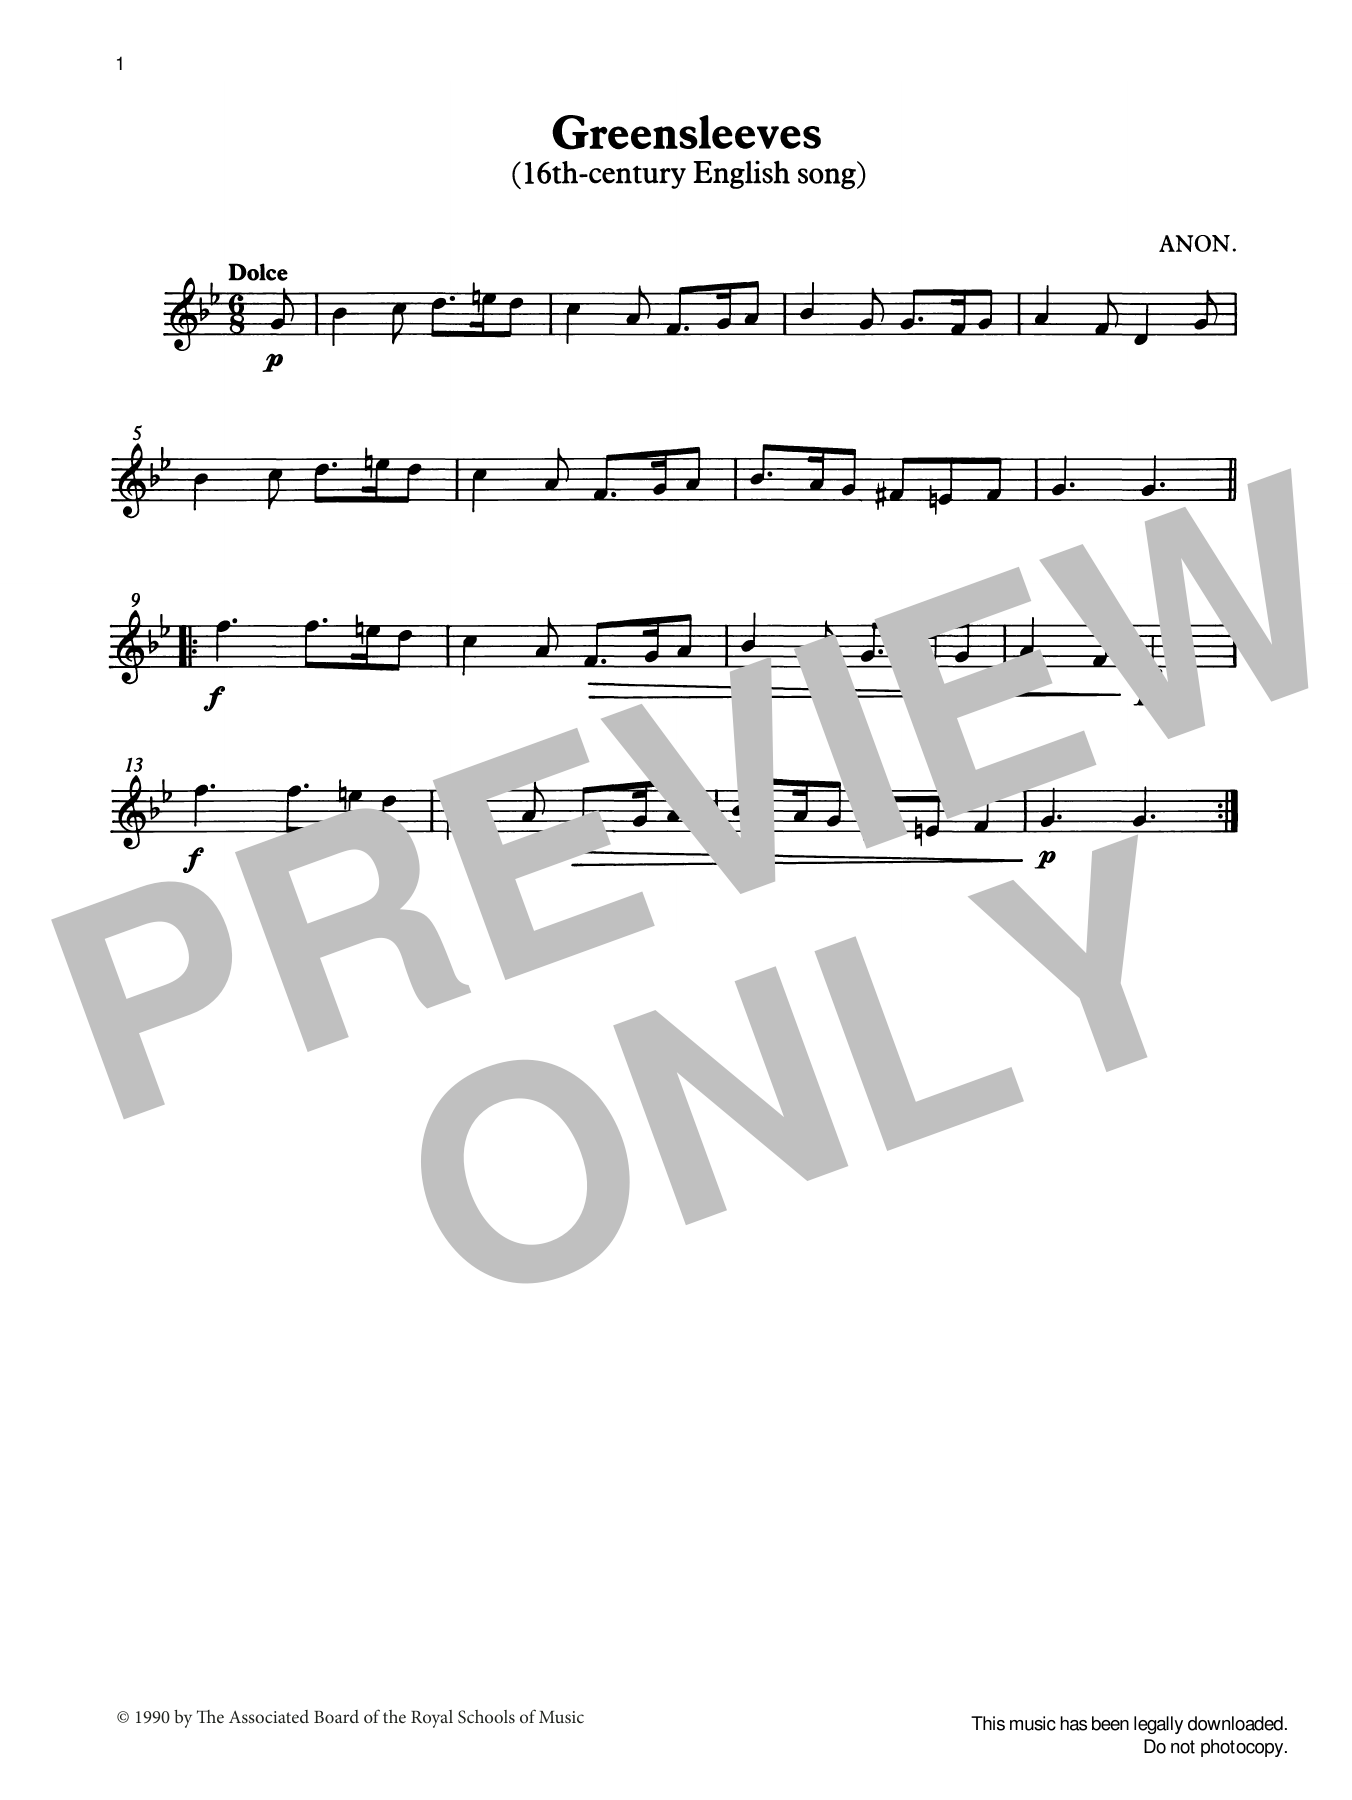 Greensleeves from Graded Music for Tuned Percussion, Book II (Percussion Solo) von Trad. English